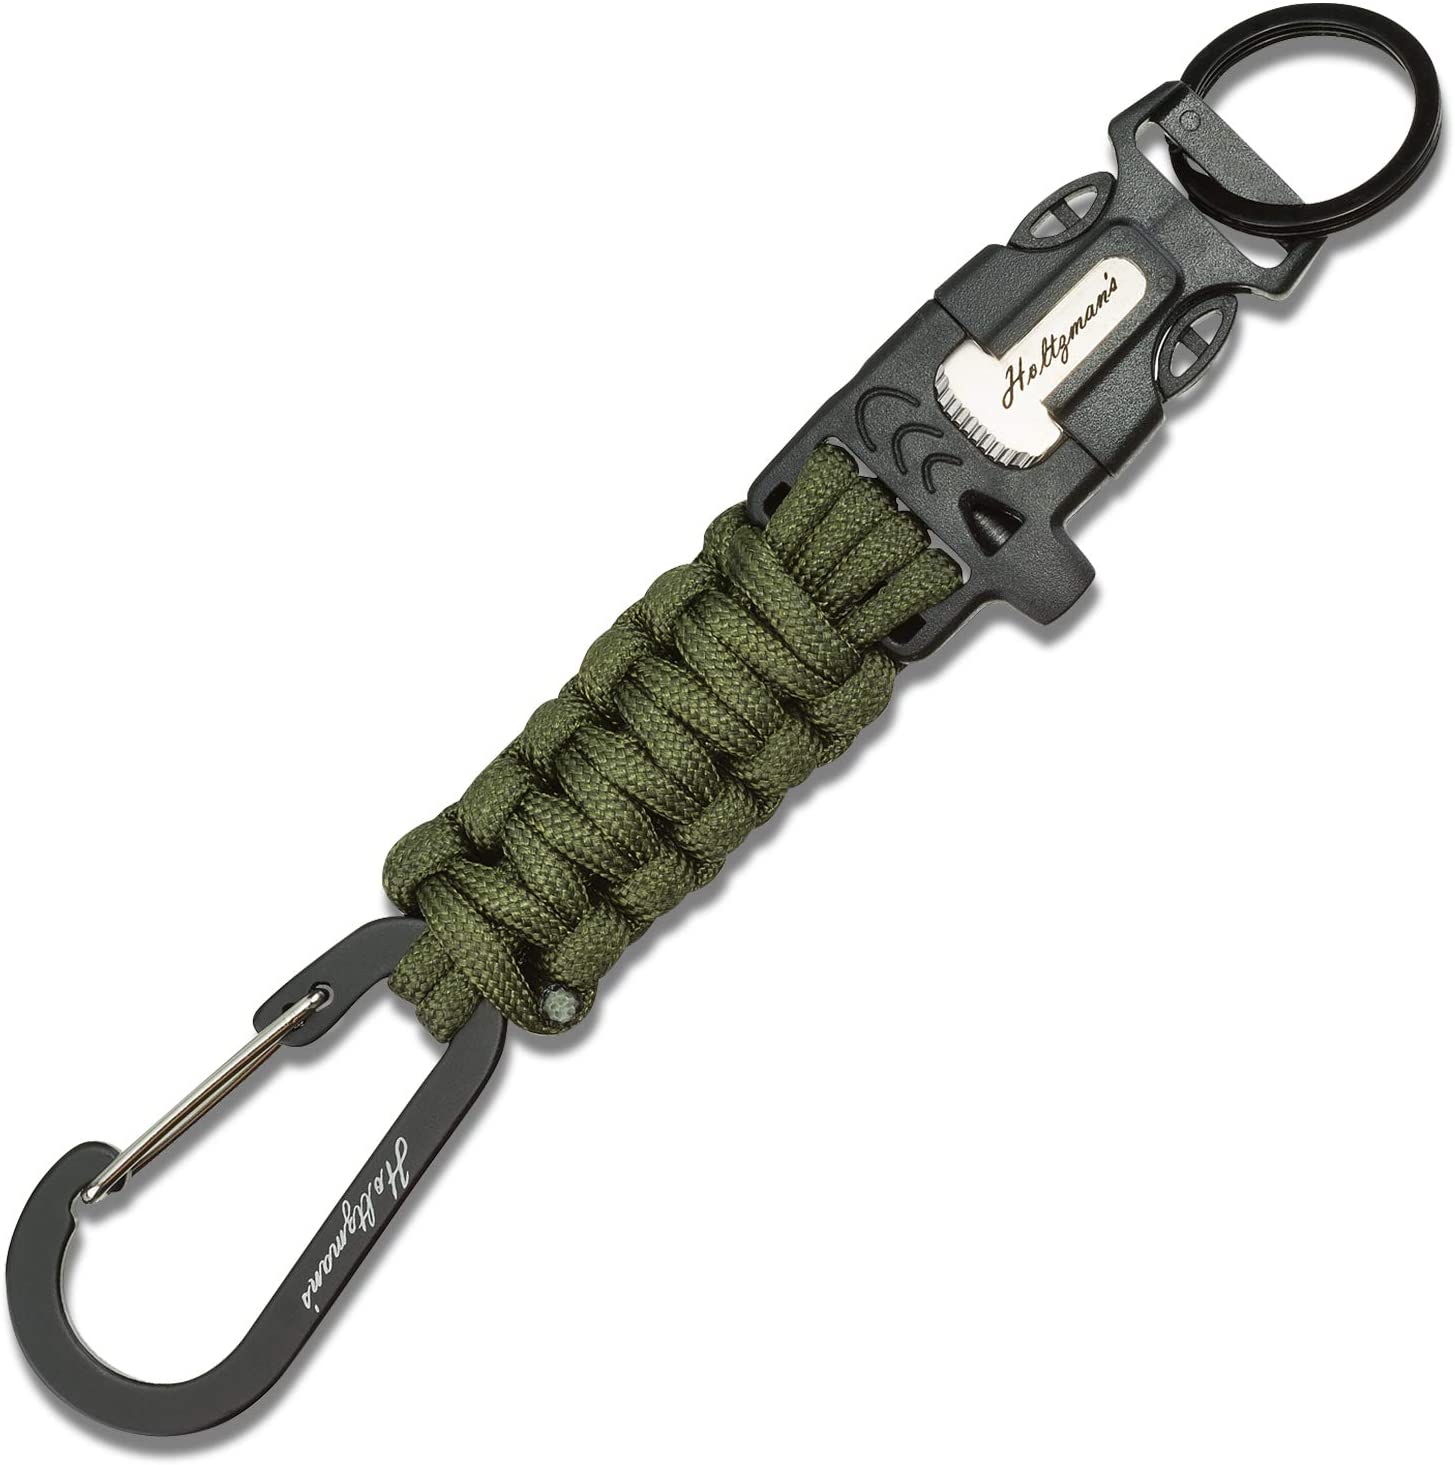 Holtzman's 5-in-1 Paracord Keychain